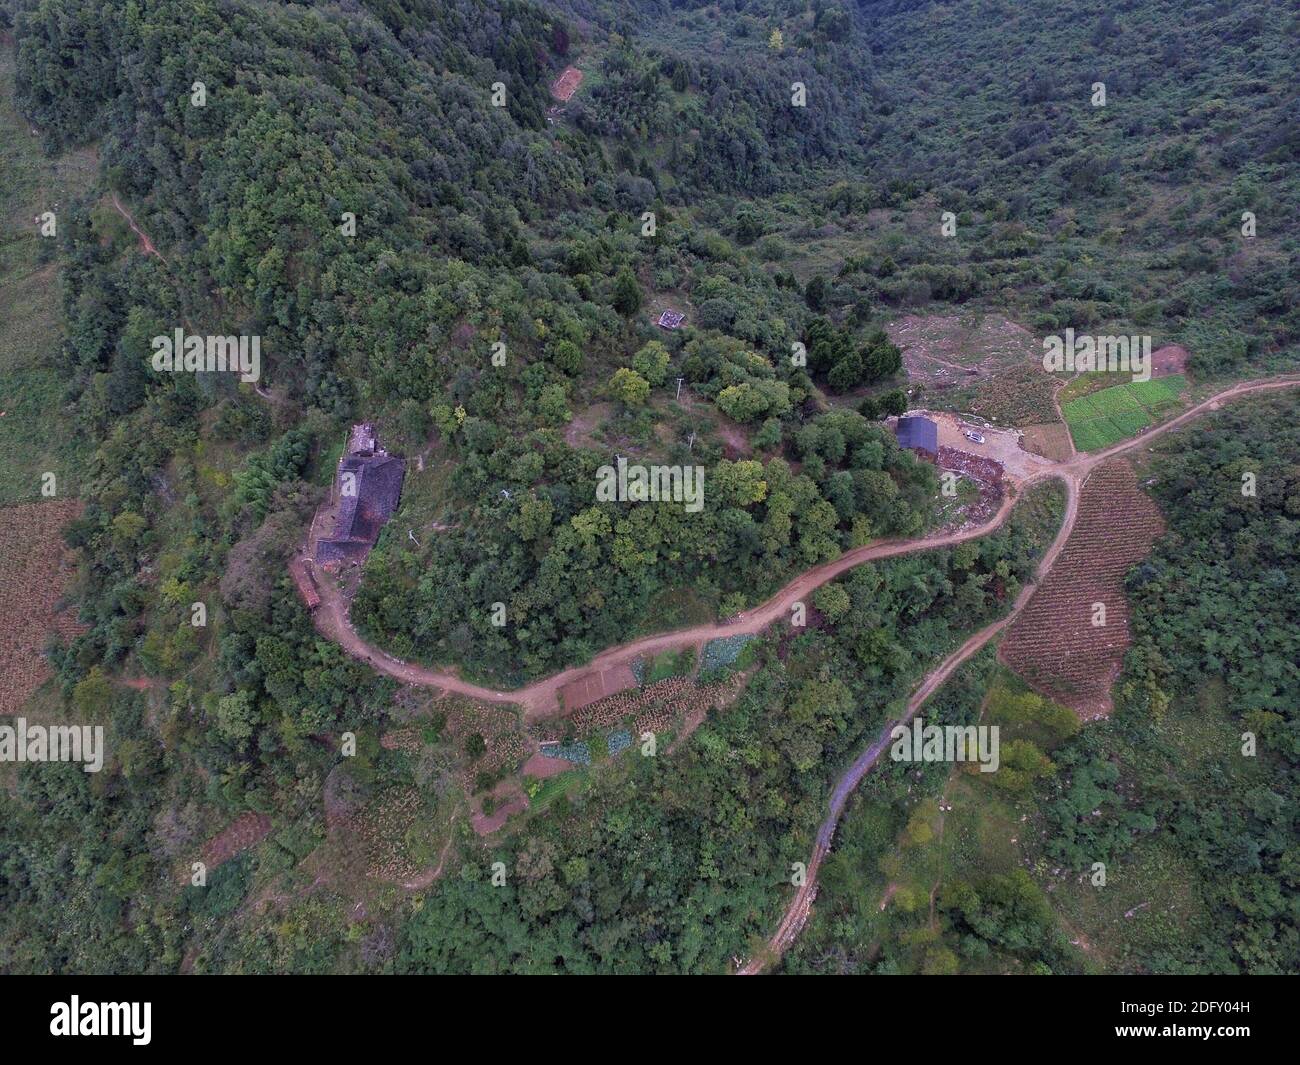 (201205) -- CHENGDU, Dec. 5, 2020 (Xinhua) -- Aerial photo shows Li Guozhi's old residence (L), a ground flattened by him, and a downhill path he made in Xiaoluoma Village, Nuoshuihe Township, Tongjiang County, southwest China's Sichuan Province, Sept. 22, 2016. Xiaoluoma is a village tucked away in the Qinling-Daba mountain areas of southwest China's Sichuan Province. For years, the villagers here had been living in poverty. In 2015, China's central government launched a 'precision poverty relief' campaign which targeted such villages as Xiaoluoma. Since then a bunch of policies, including sm Stock Photo